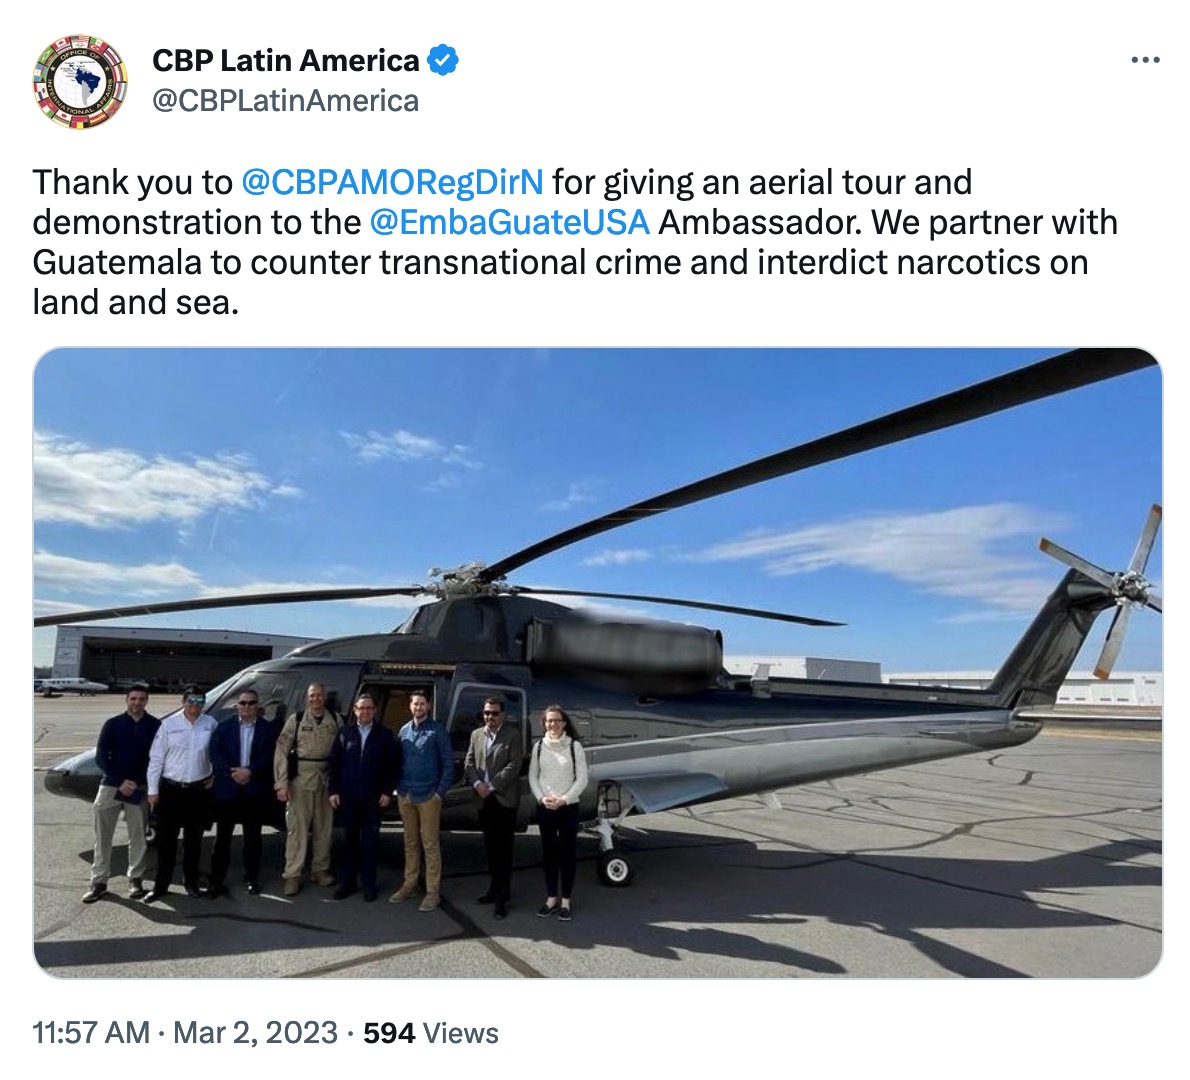 From CBP Latin America @CBPLatinAmerica on Twitter:

"Thank you to @CBPAMORegDirN for giving an aerial tour and demonstration to the @EmbaGuateUSA Ambassador. We partner with Guatemala to counter transnational crime and interdict narcotics on land and sea."

*Photo of all posing in front of what appears to be a Black Hawk*